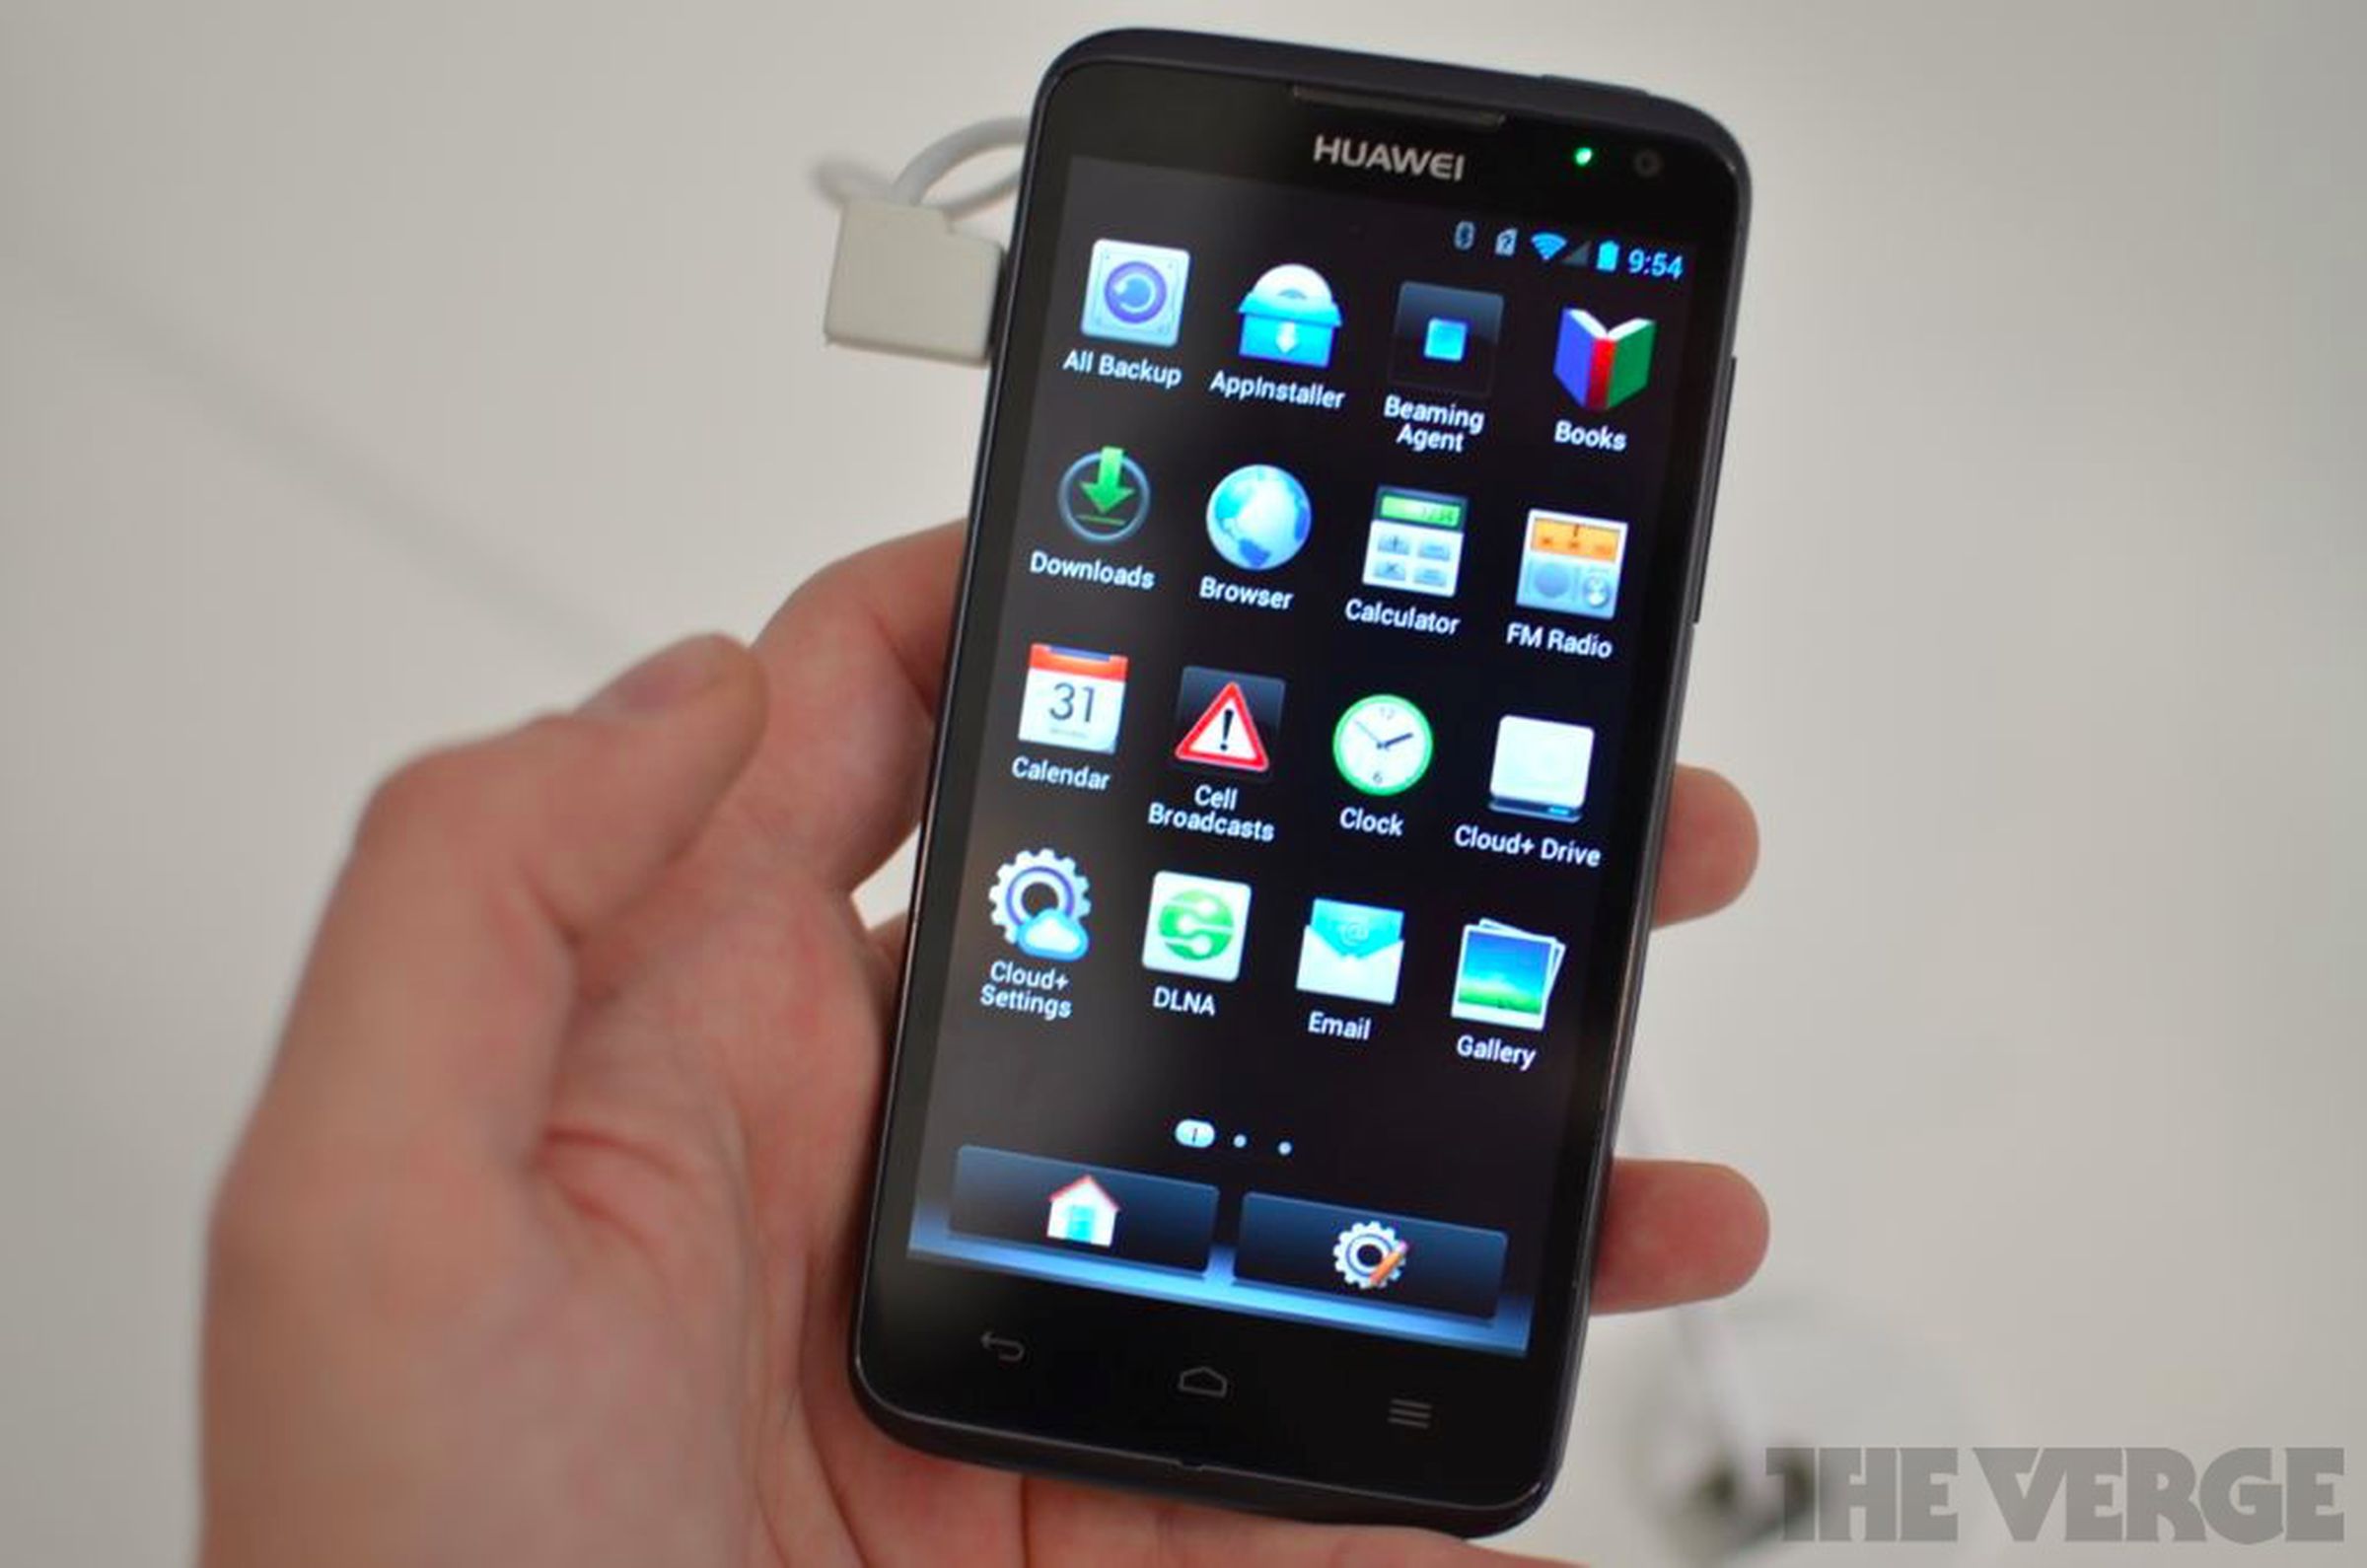 Huawei Ascend D1 hands-on pictures